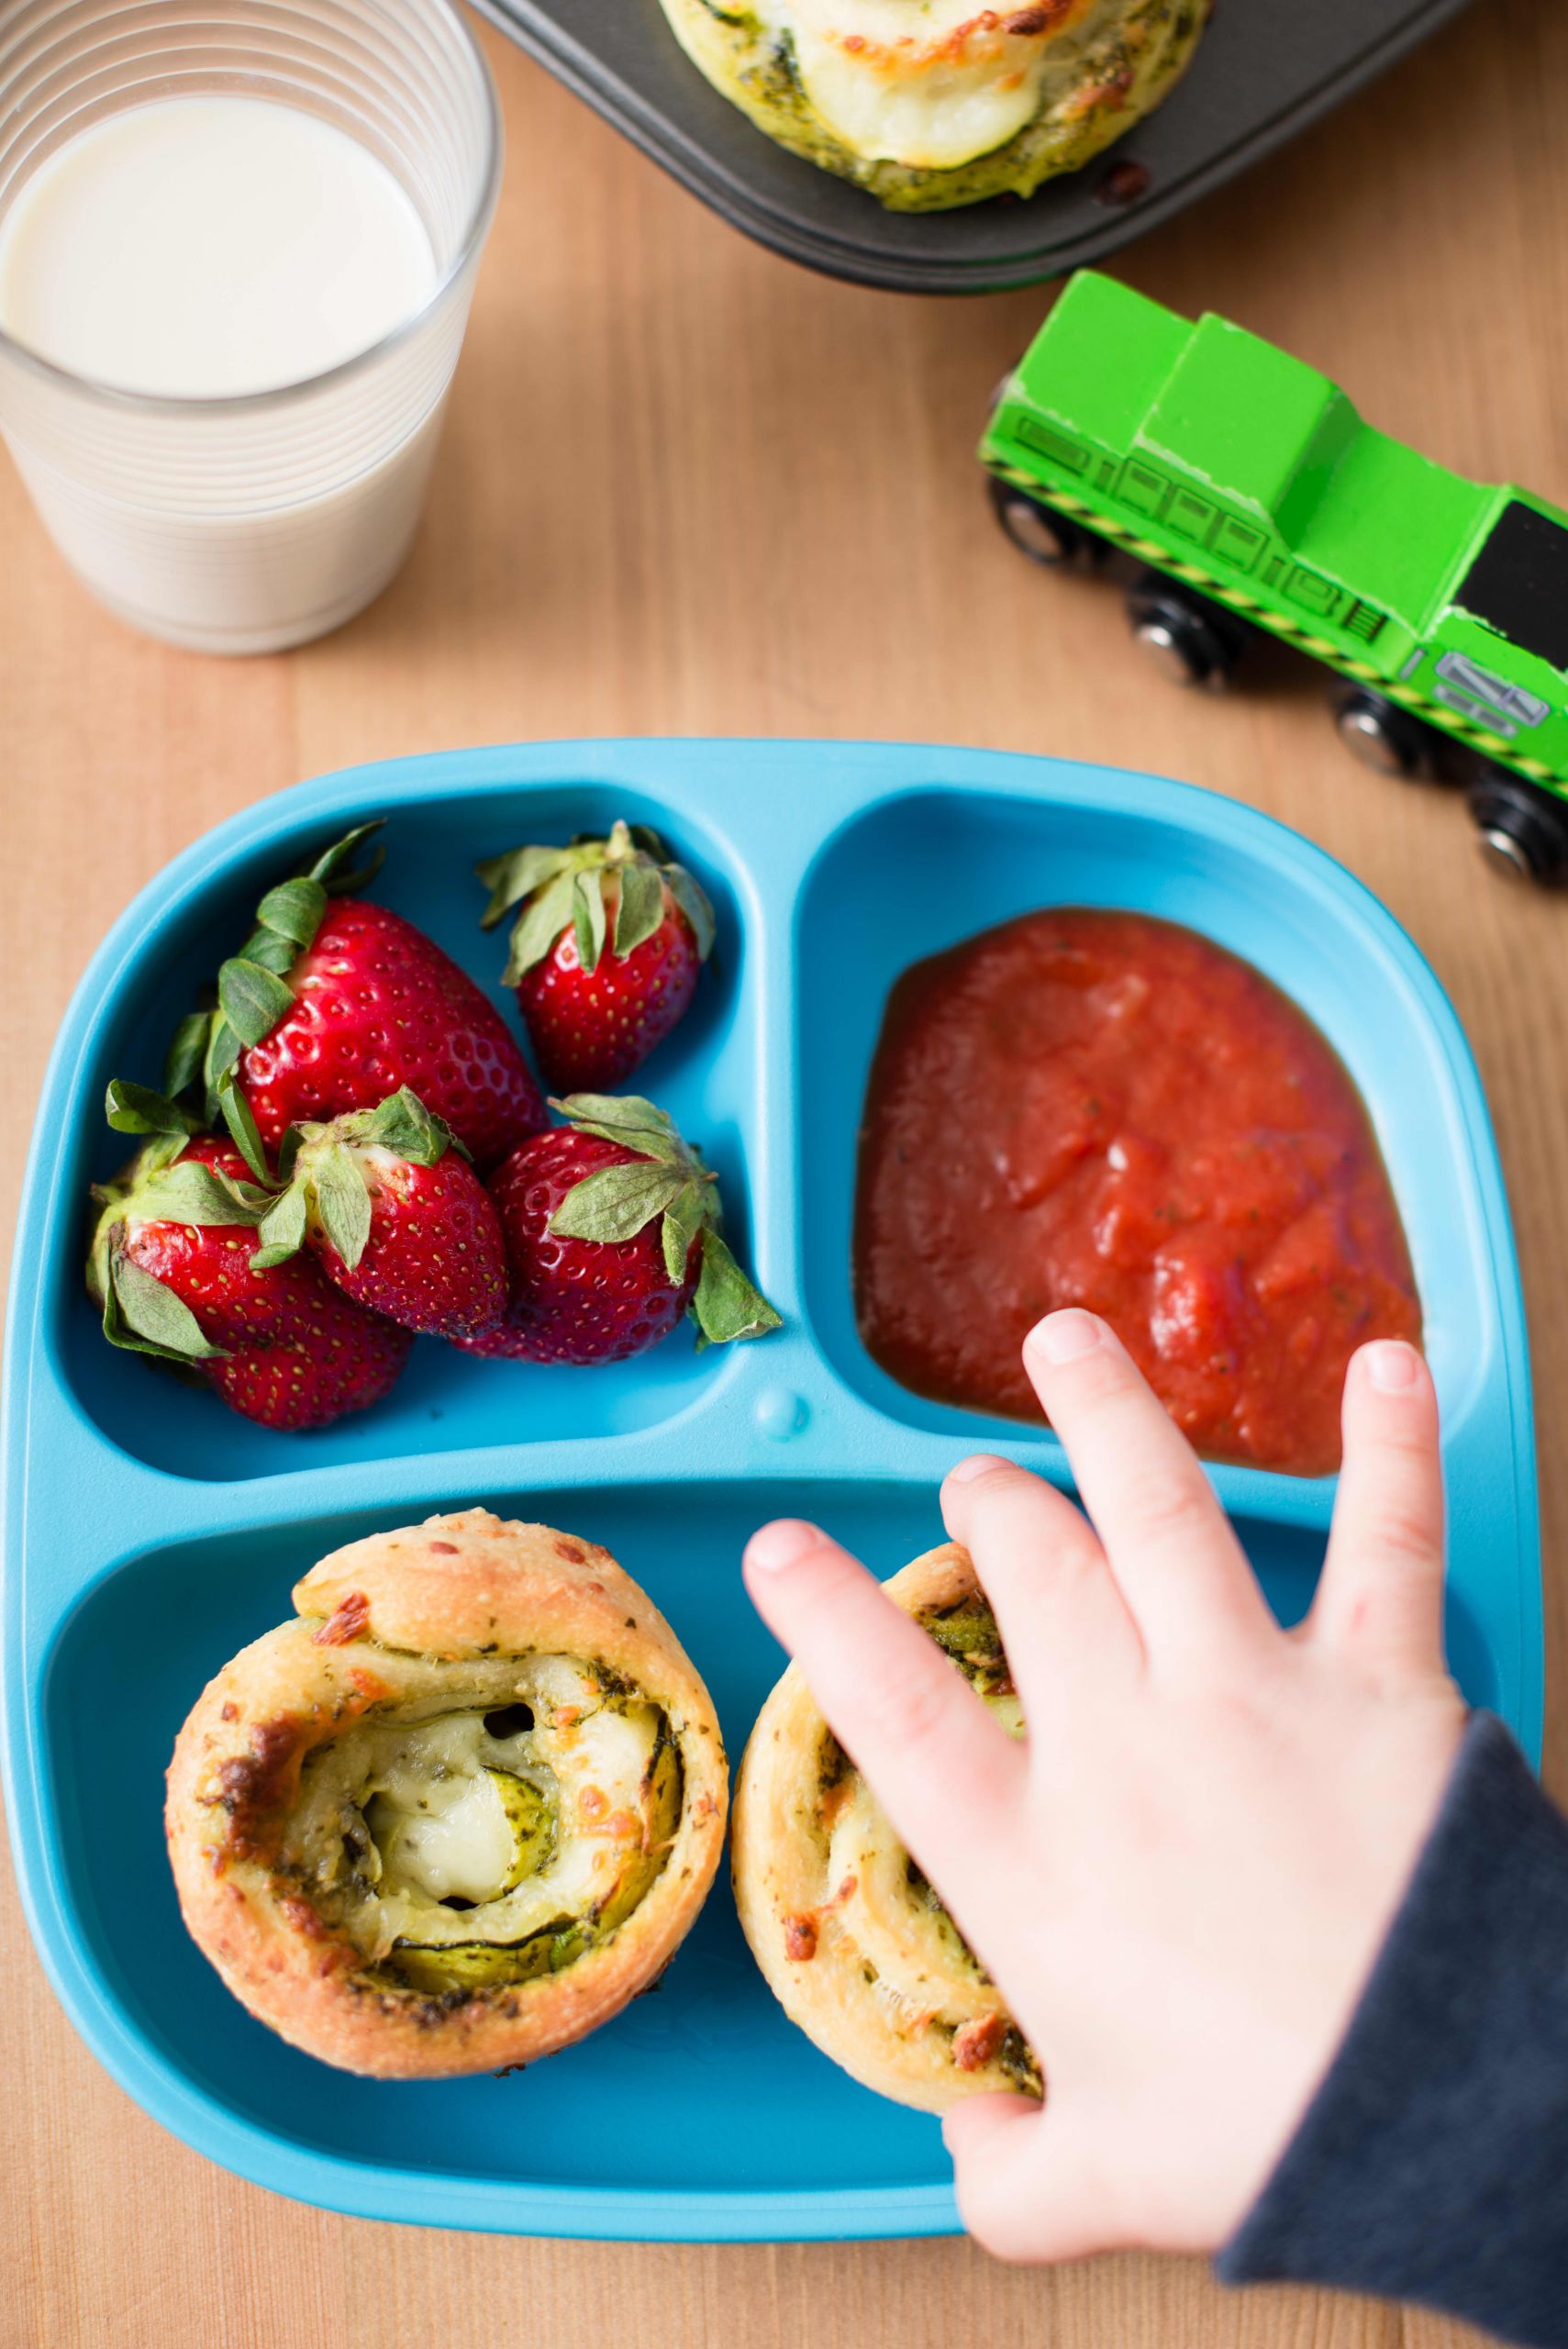 Top 15 Dinners for Kids